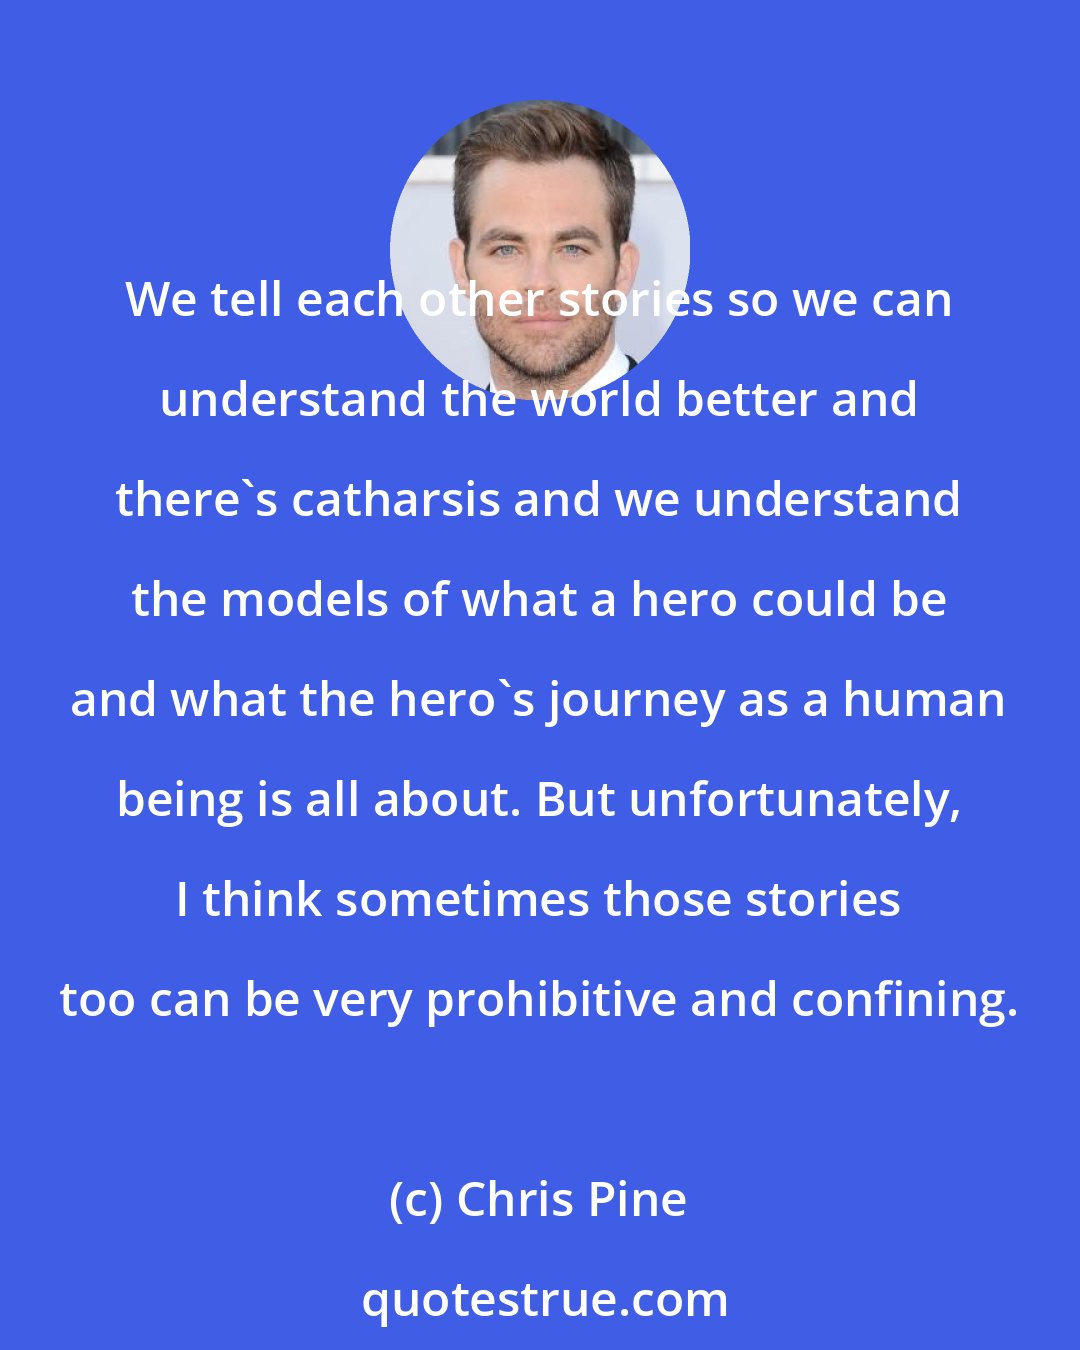 Chris Pine: We tell each other stories so we can understand the world better and there's catharsis and we understand the models of what a hero could be and what the hero's journey as a human being is all about. But unfortunately, I think sometimes those stories too can be very prohibitive and confining.